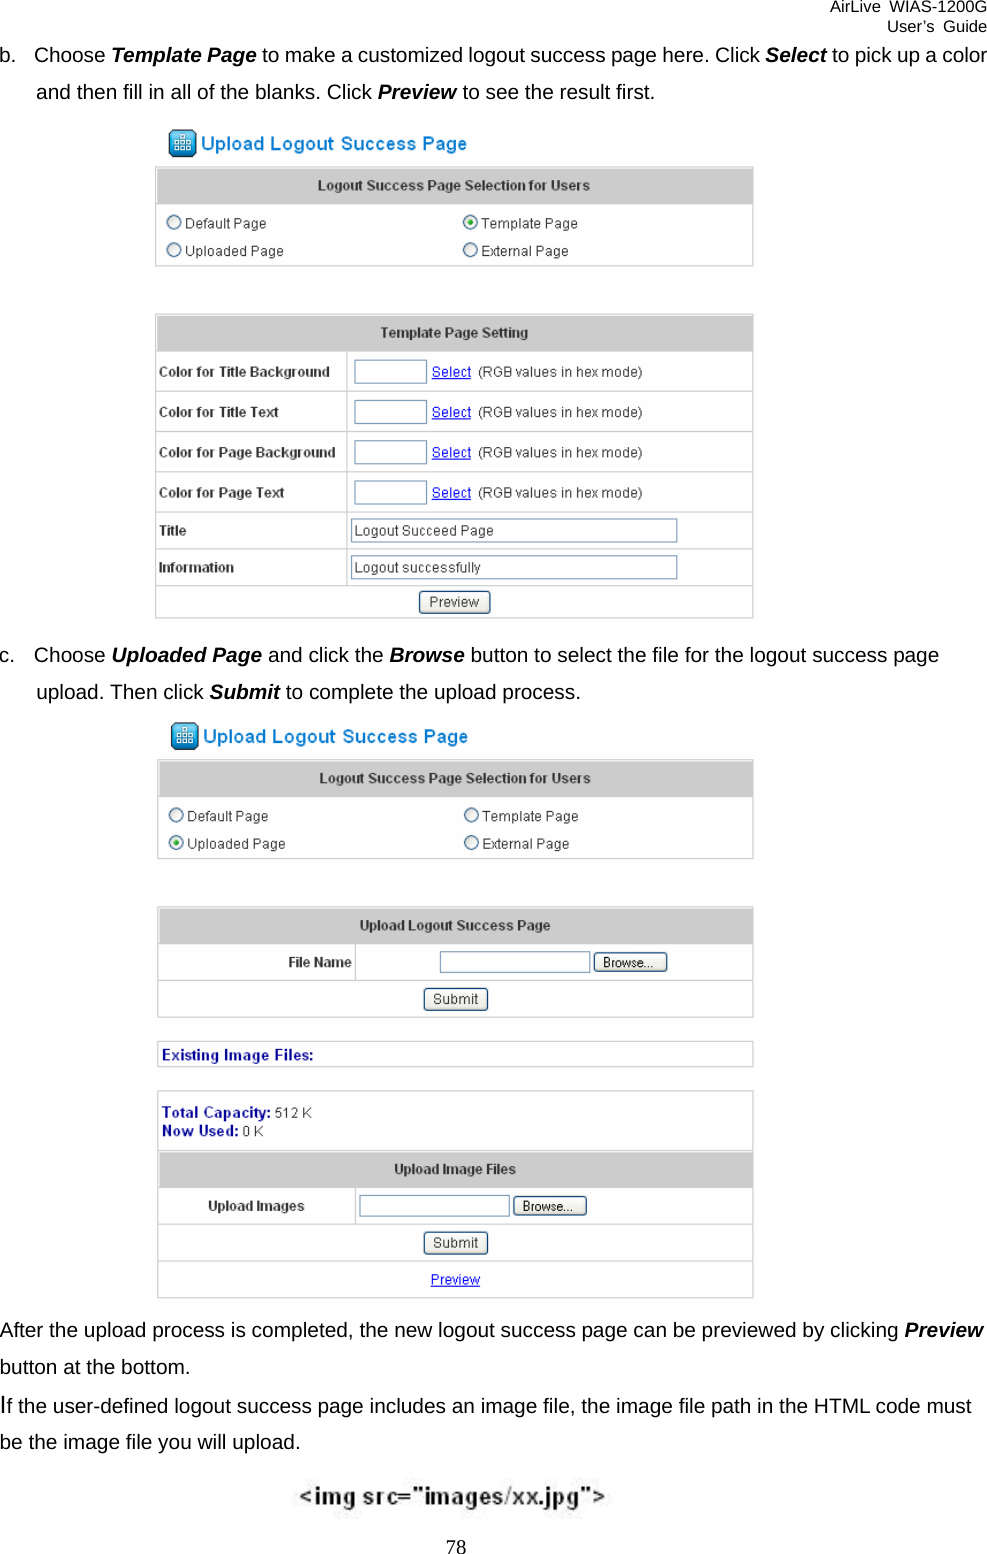 AirLive WIAS-1200G User’s Guide 78 b. Choose Template Page to make a customized logout success page here. Click Select to pick up a color and then fill in all of the blanks. Click Preview to see the result first.  c. Choose Uploaded Page and click the Browse button to select the file for the logout success page upload. Then click Submit to complete the upload process.  After the upload process is completed, the new logout success page can be previewed by clicking Preview button at the bottom.   If the user-defined logout success page includes an image file, the image file path in the HTML code must be the image file you will upload.    